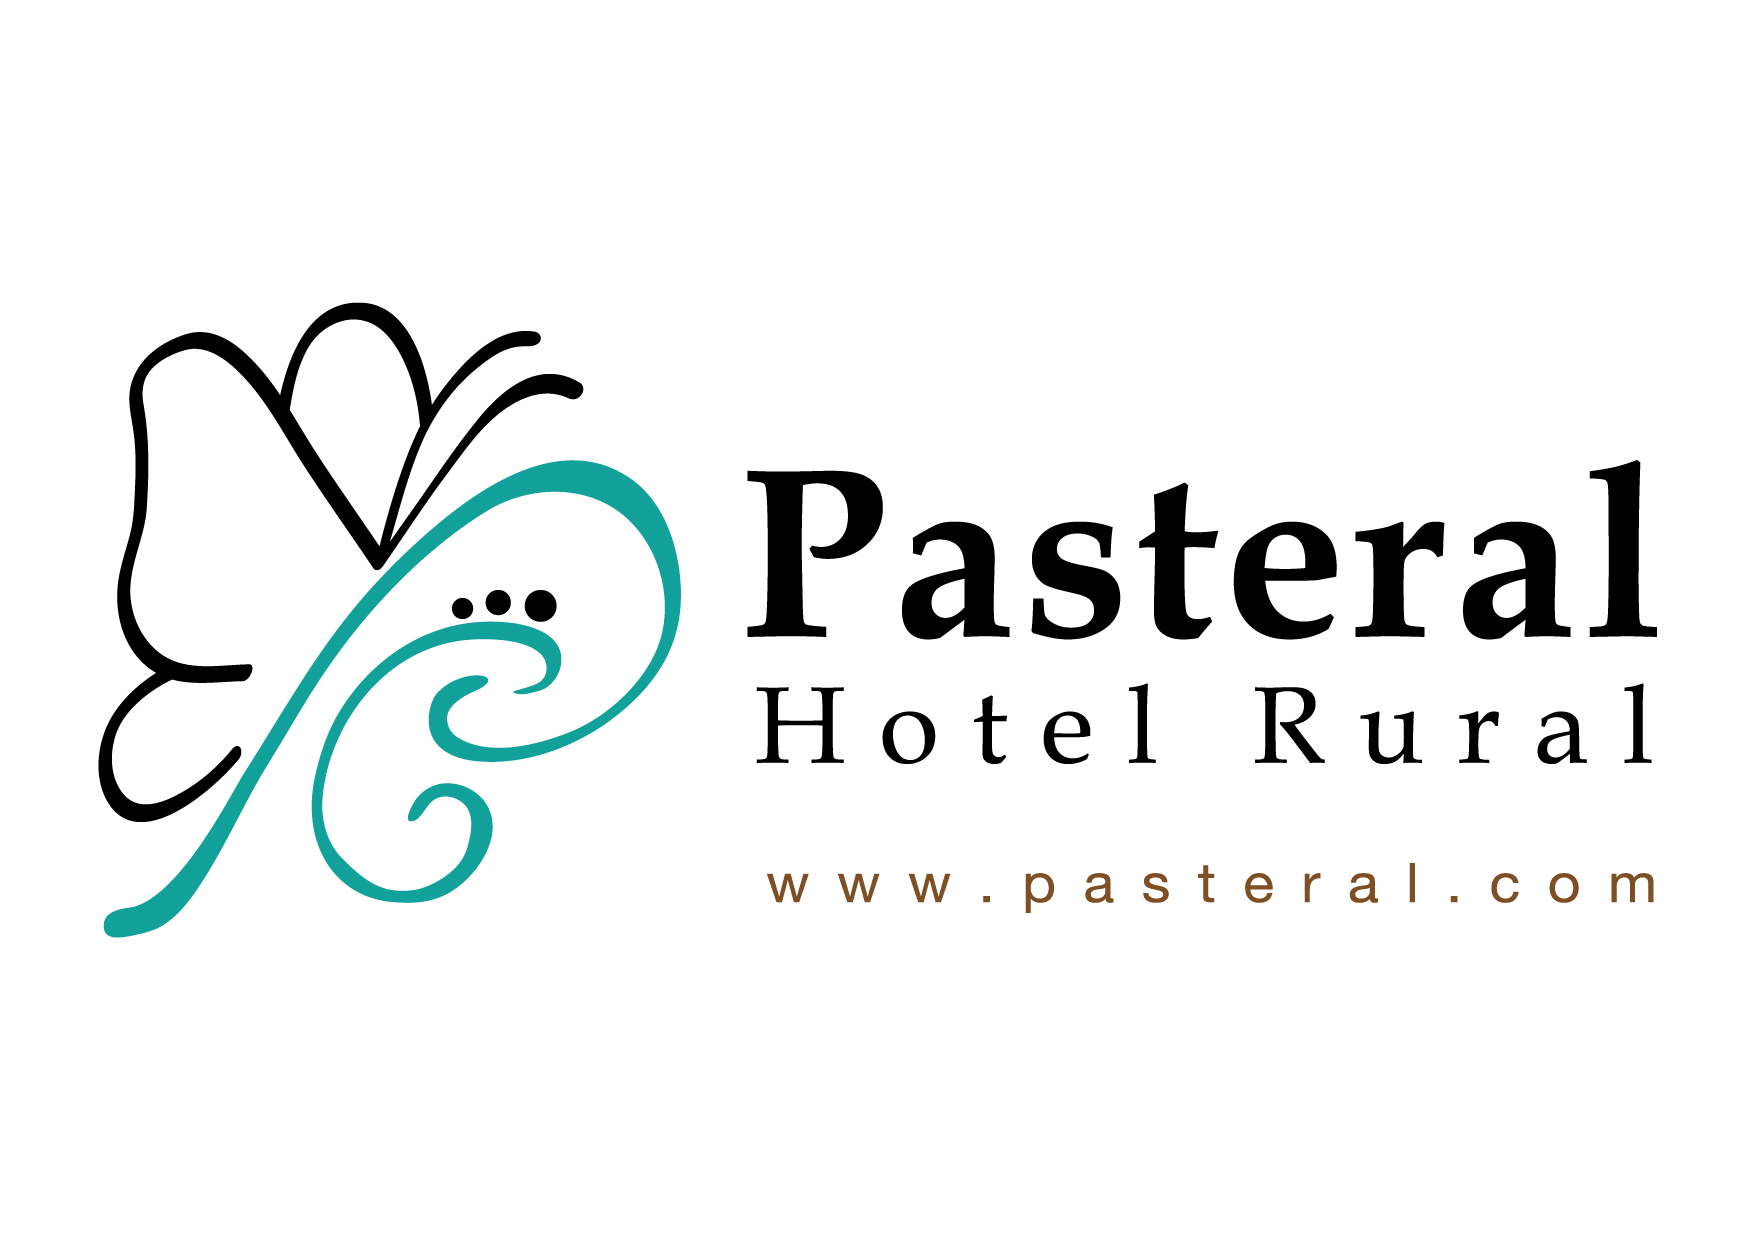 Hotel pasteral, logo-04